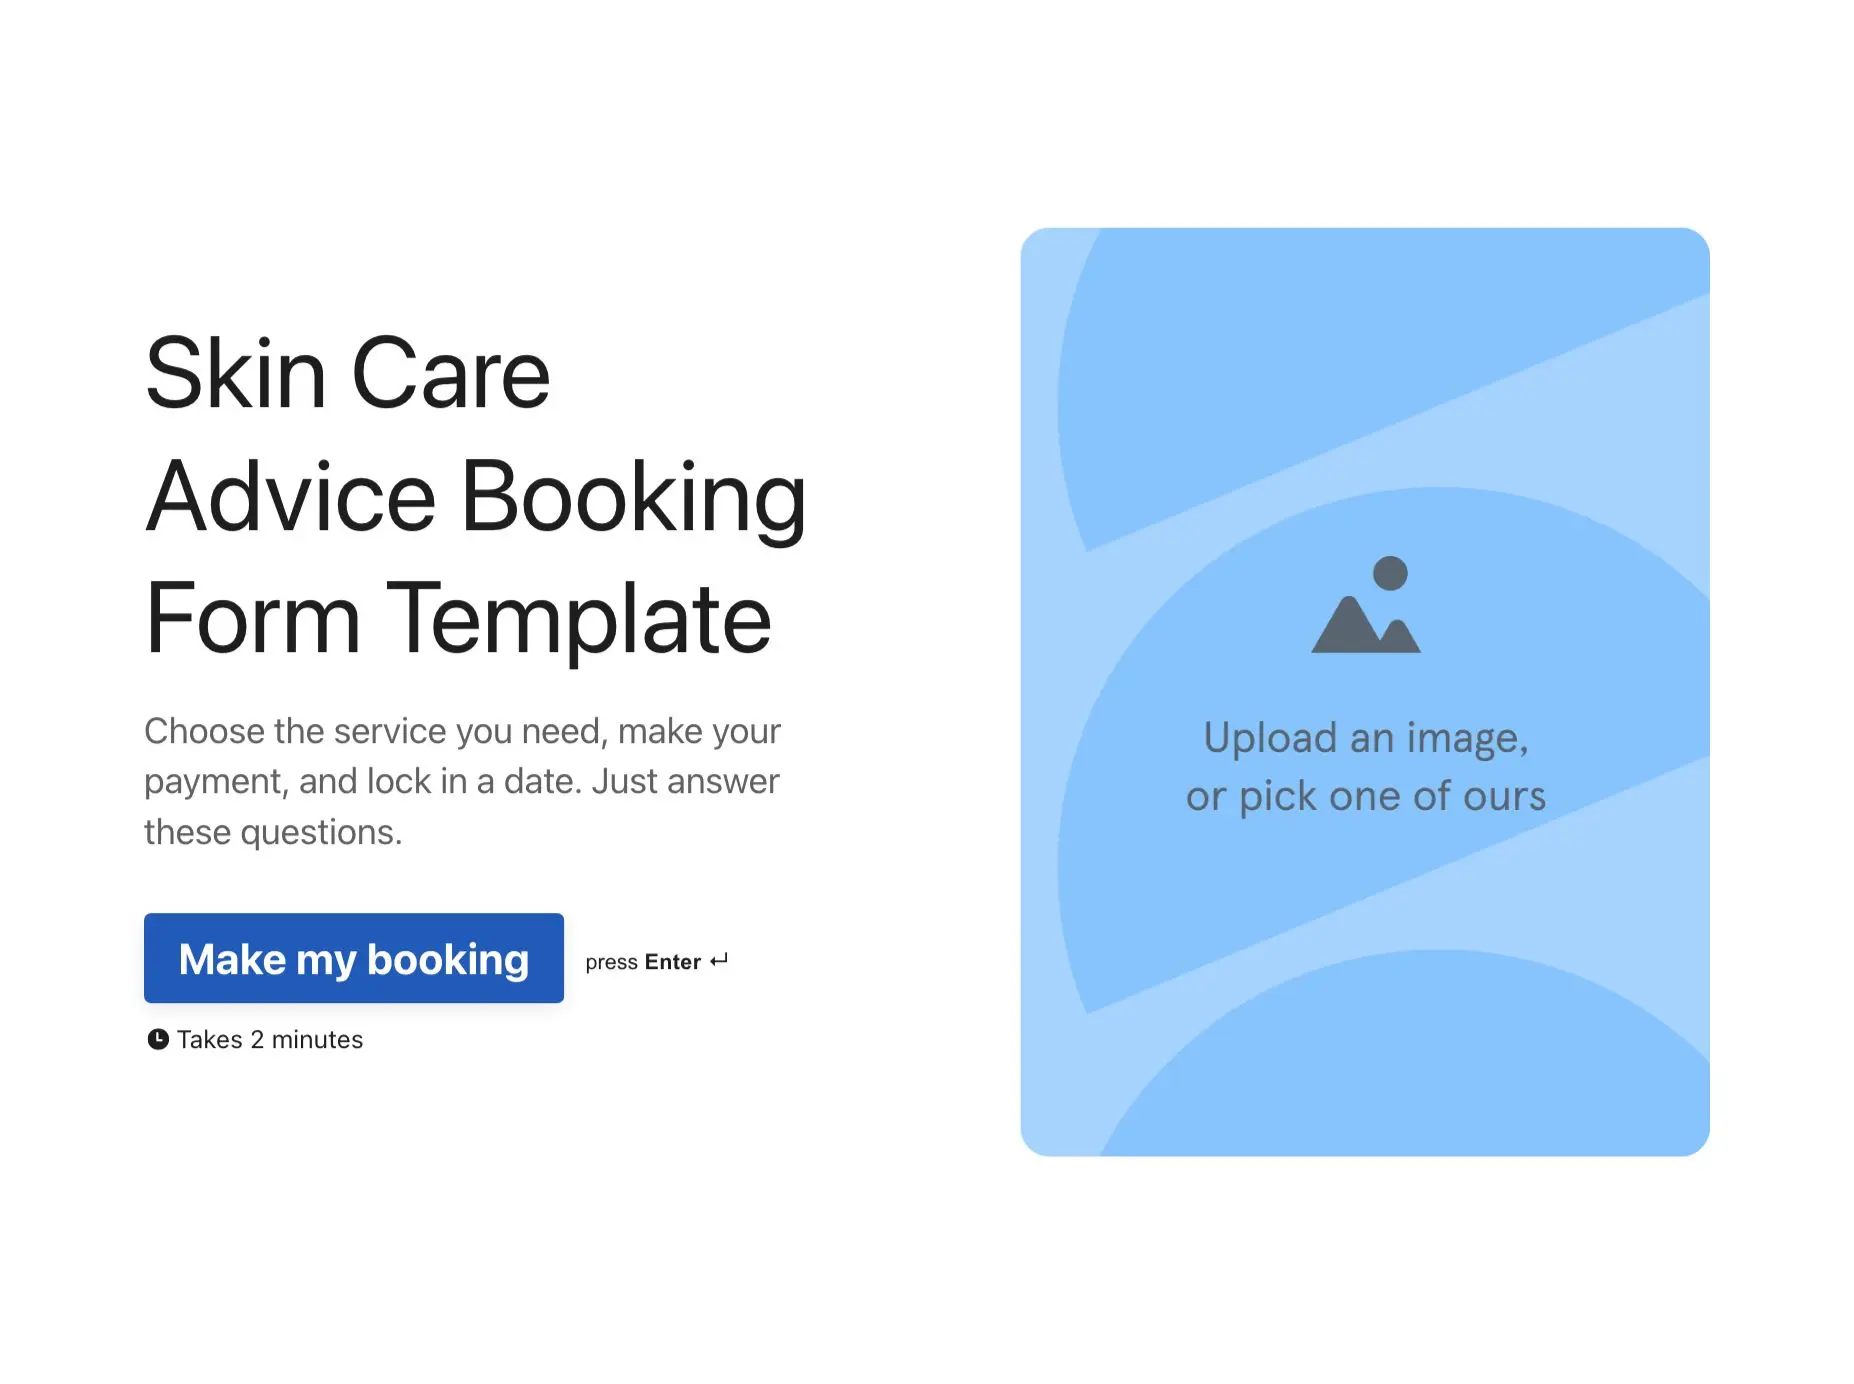 Skin Care Advice Booking Form Template Hero